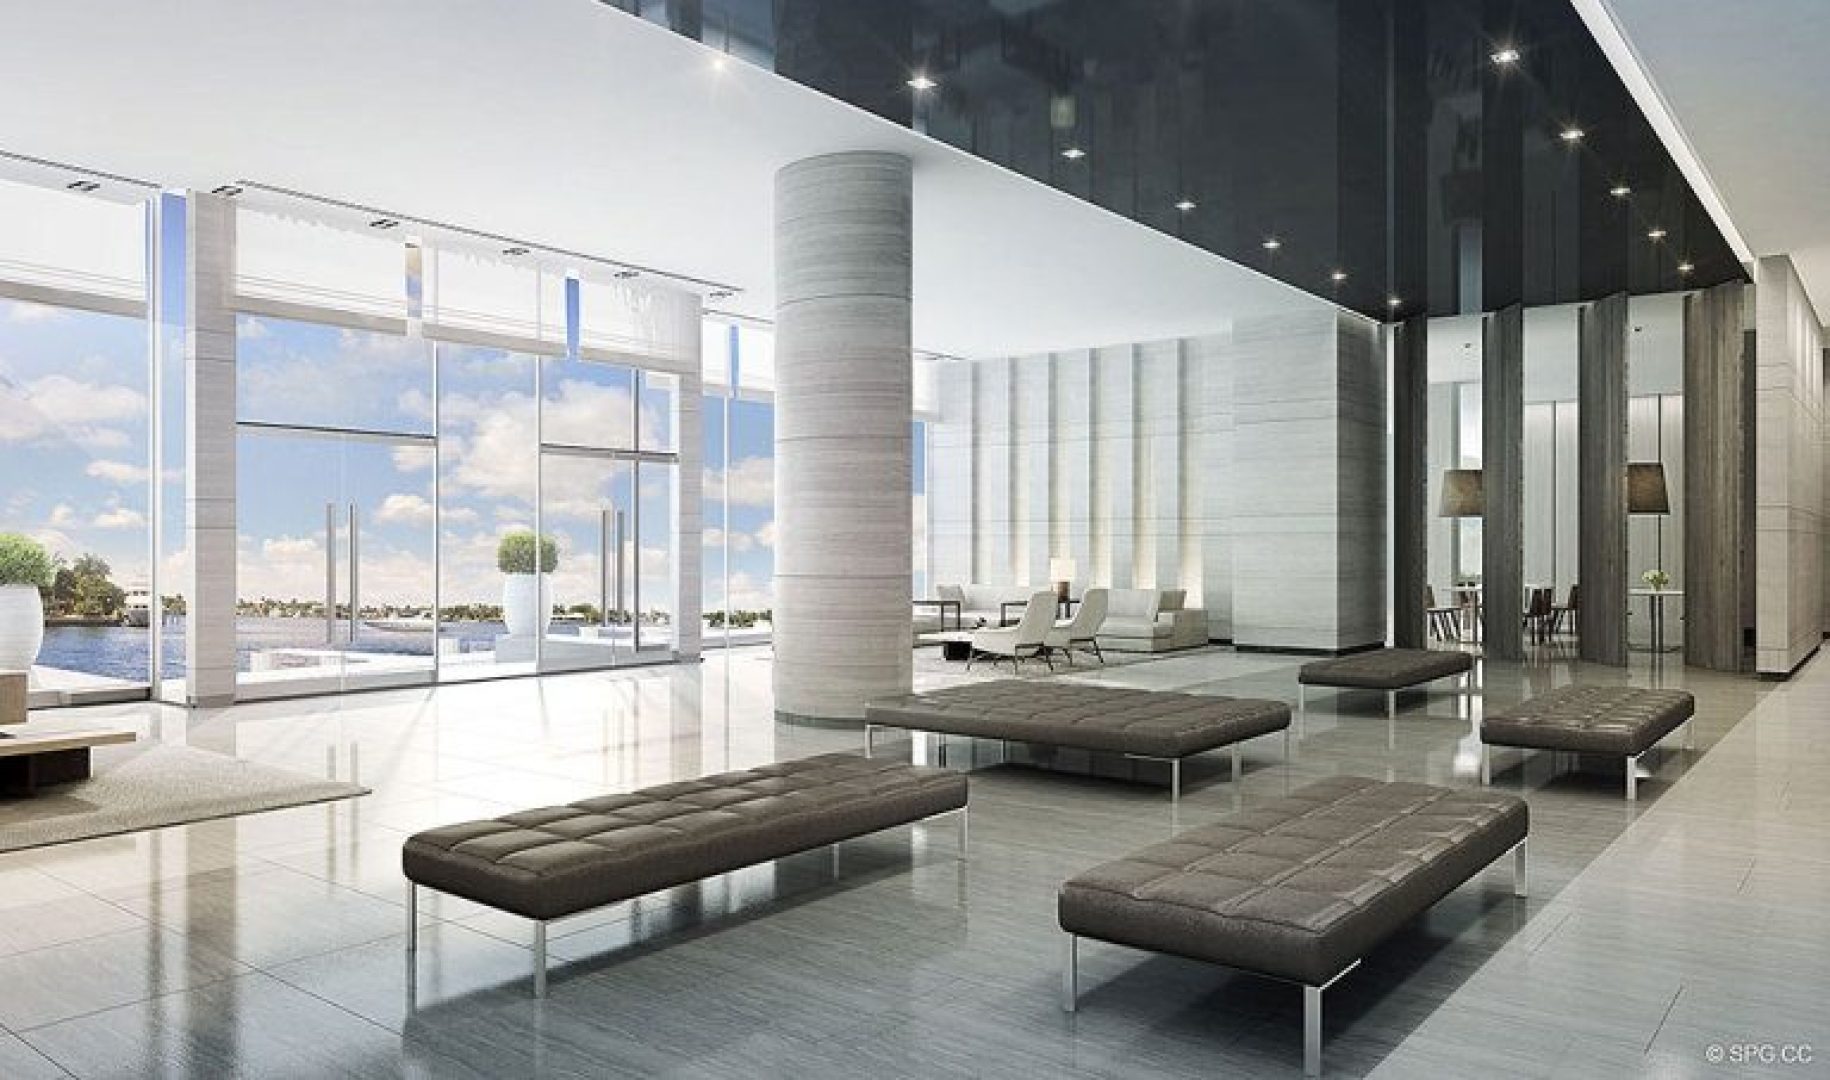 Lobby Concept for Riva, Luxury Waterfront Condos in Fort Lauderdale, Florida 33304.